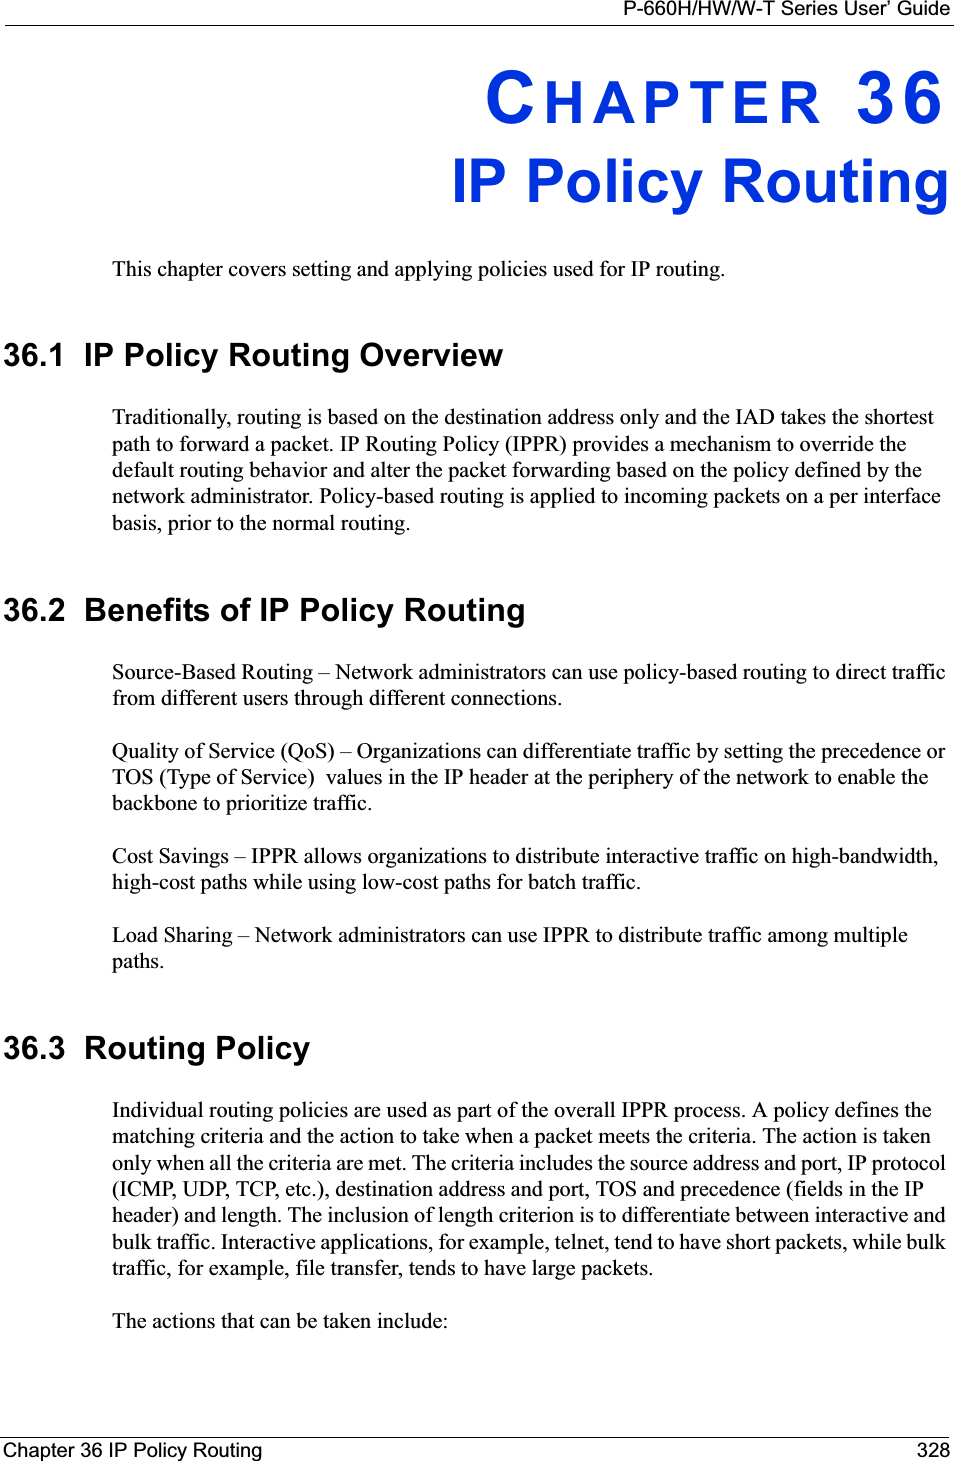 P-660H/HW/W-T Series User’ GuideChapter 36 IP Policy Routing 328CHAPTER 36IP Policy RoutingThis chapter covers setting and applying policies used for IP routing.36.1  IP Policy Routing OverviewTraditionally, routing is based on the destination address only and the IAD takes the shortest path to forward a packet. IP Routing Policy (IPPR) provides a mechanism to override the default routing behavior and alter the packet forwarding based on the policy defined by the network administrator. Policy-based routing is applied to incoming packets on a per interface basis, prior to the normal routing.36.2  Benefits of IP Policy RoutingSource-Based Routing – Network administrators can use policy-based routing to direct traffic from different users through different connections.Quality of Service (QoS) – Organizations can differentiate traffic by setting the precedence or TOS (Type of Service)  values in the IP header at the periphery of the network to enable the backbone to prioritize traffic.Cost Savings – IPPR allows organizations to distribute interactive traffic on high-bandwidth, high-cost paths while using low-cost paths for batch traffic.Load Sharing – Network administrators can use IPPR to distribute traffic among multiple paths.36.3  Routing PolicyIndividual routing policies are used as part of the overall IPPR process. A policy defines the matching criteria and the action to take when a packet meets the criteria. The action is taken only when all the criteria are met. The criteria includes the source address and port, IP protocol (ICMP, UDP, TCP, etc.), destination address and port, TOS and precedence (fields in the IP header) and length. The inclusion of length criterion is to differentiate between interactive and bulk traffic. Interactive applications, for example, telnet, tend to have short packets, while bulk traffic, for example, file transfer, tends to have large packets.The actions that can be taken include: